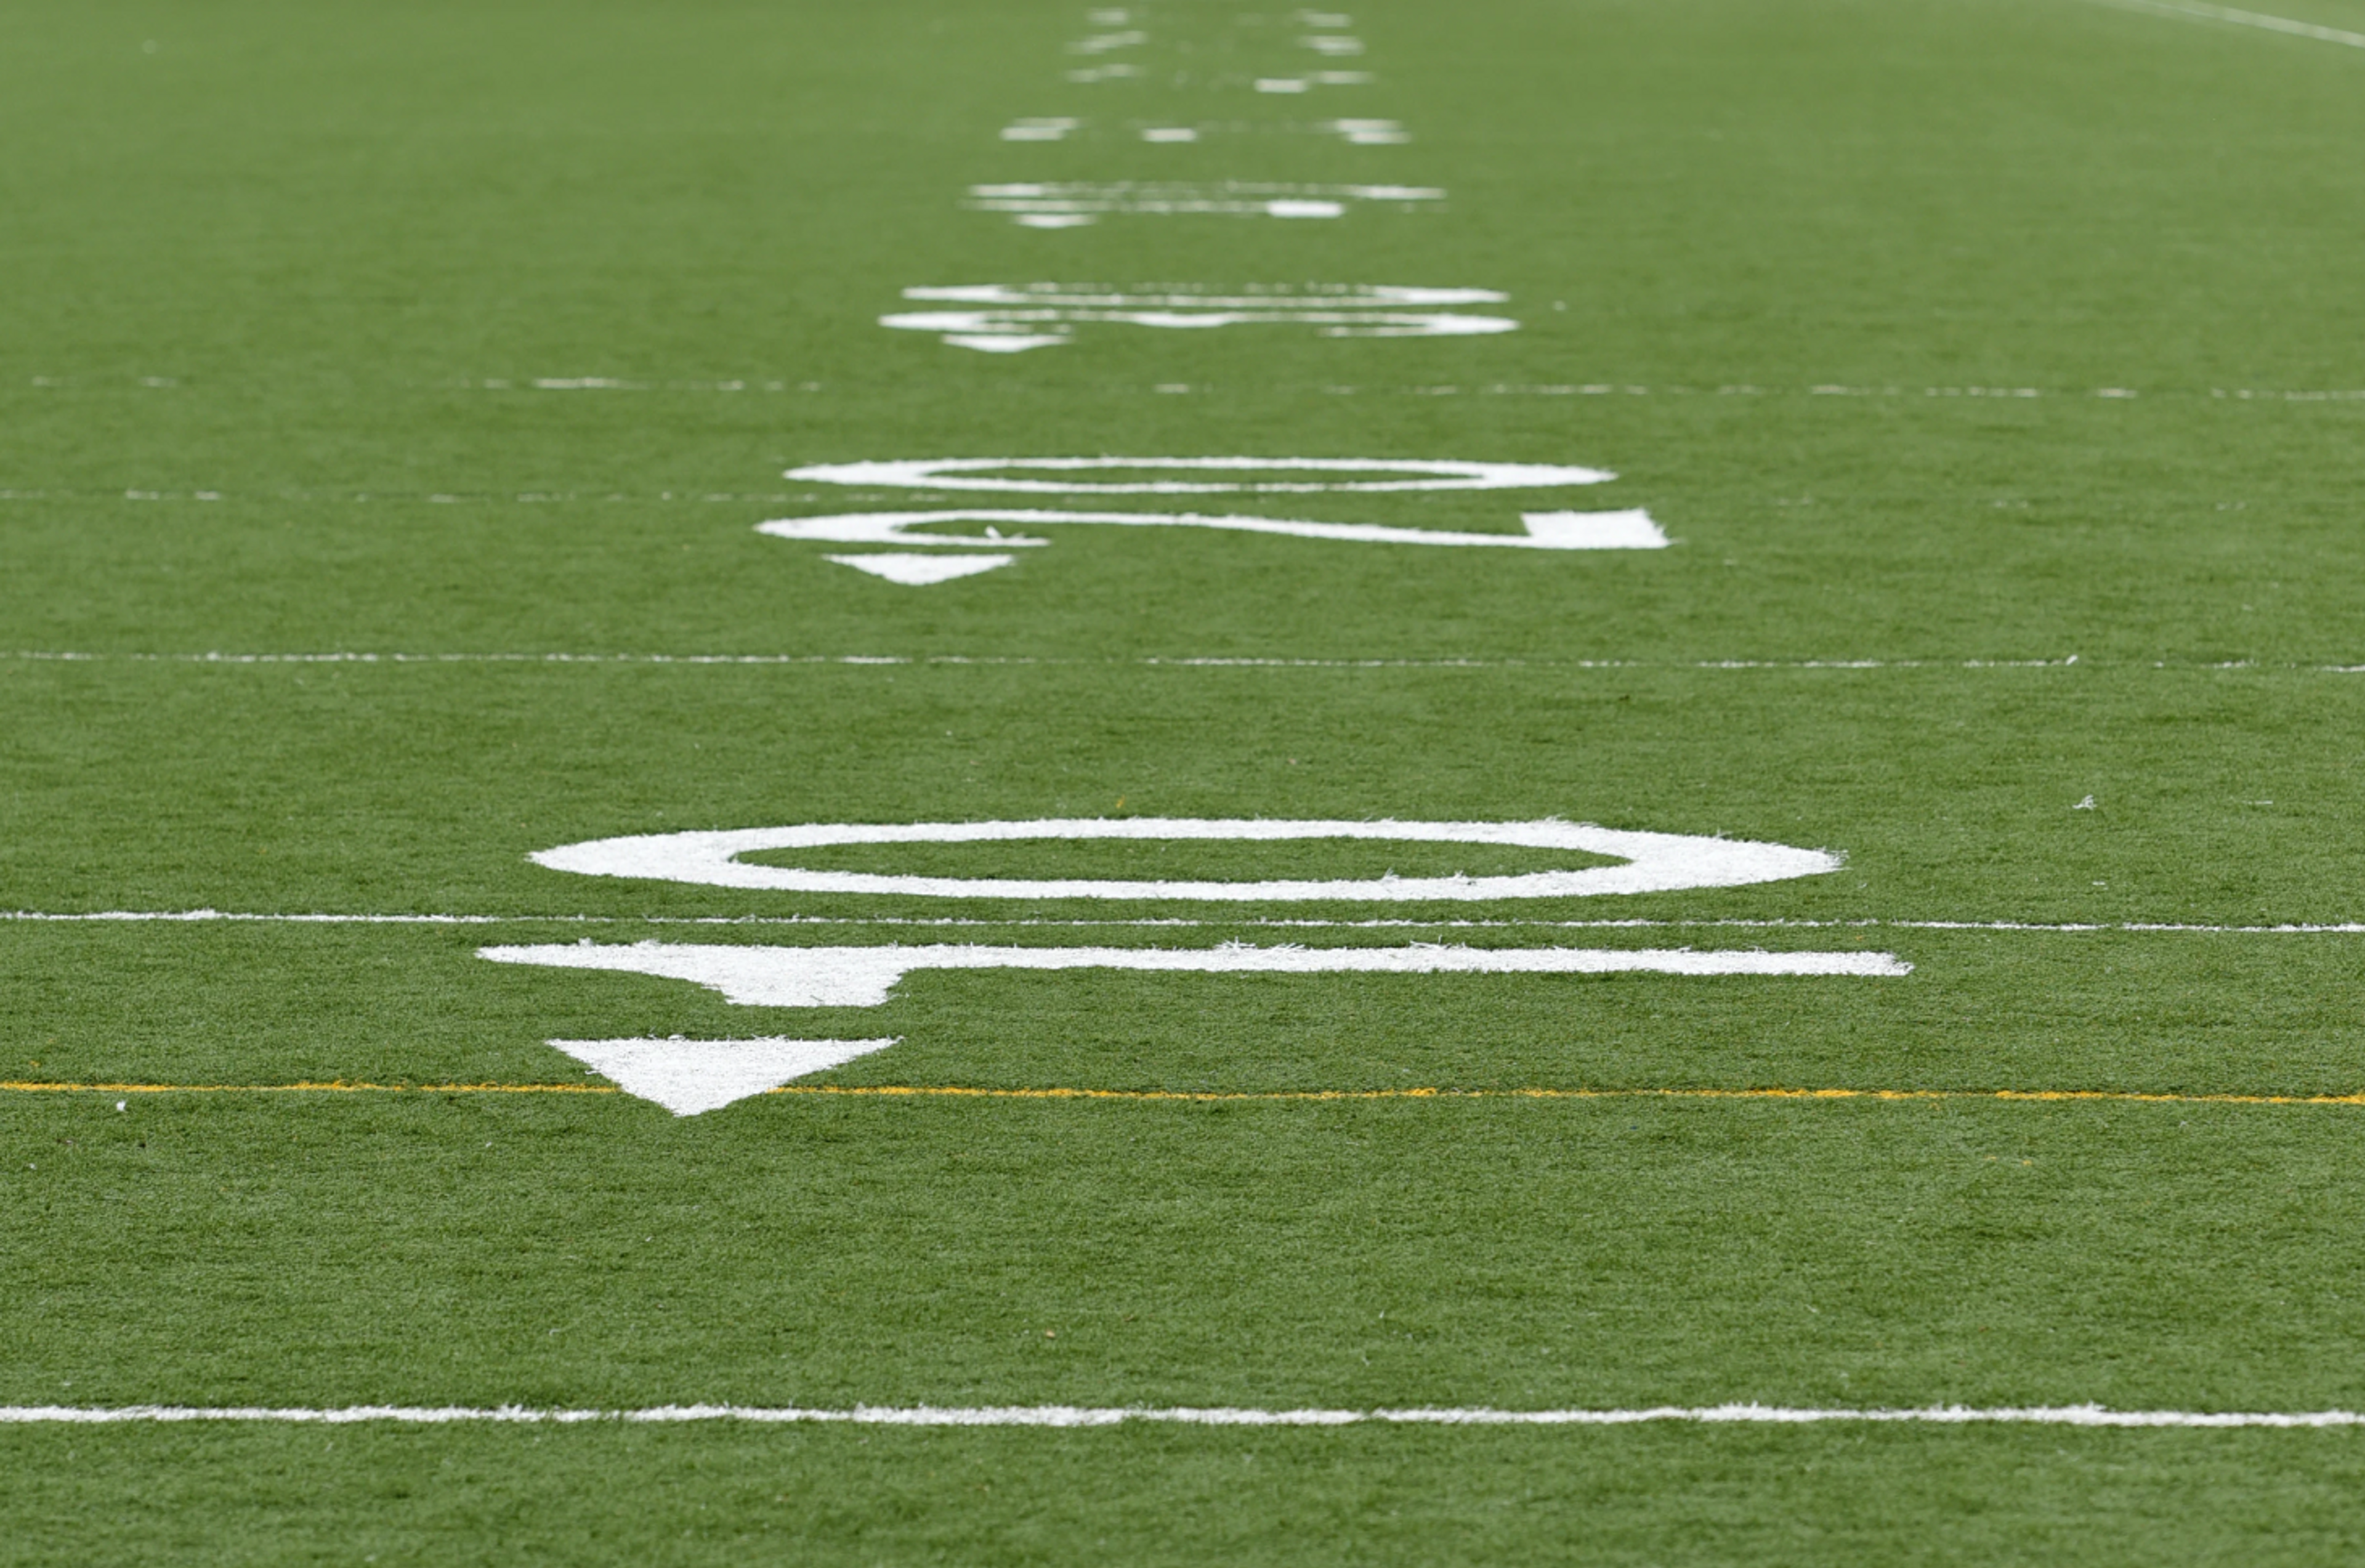 A Leading Payment Platform Scores Their Own “Touchdown” With DataStax During the Super Bowl